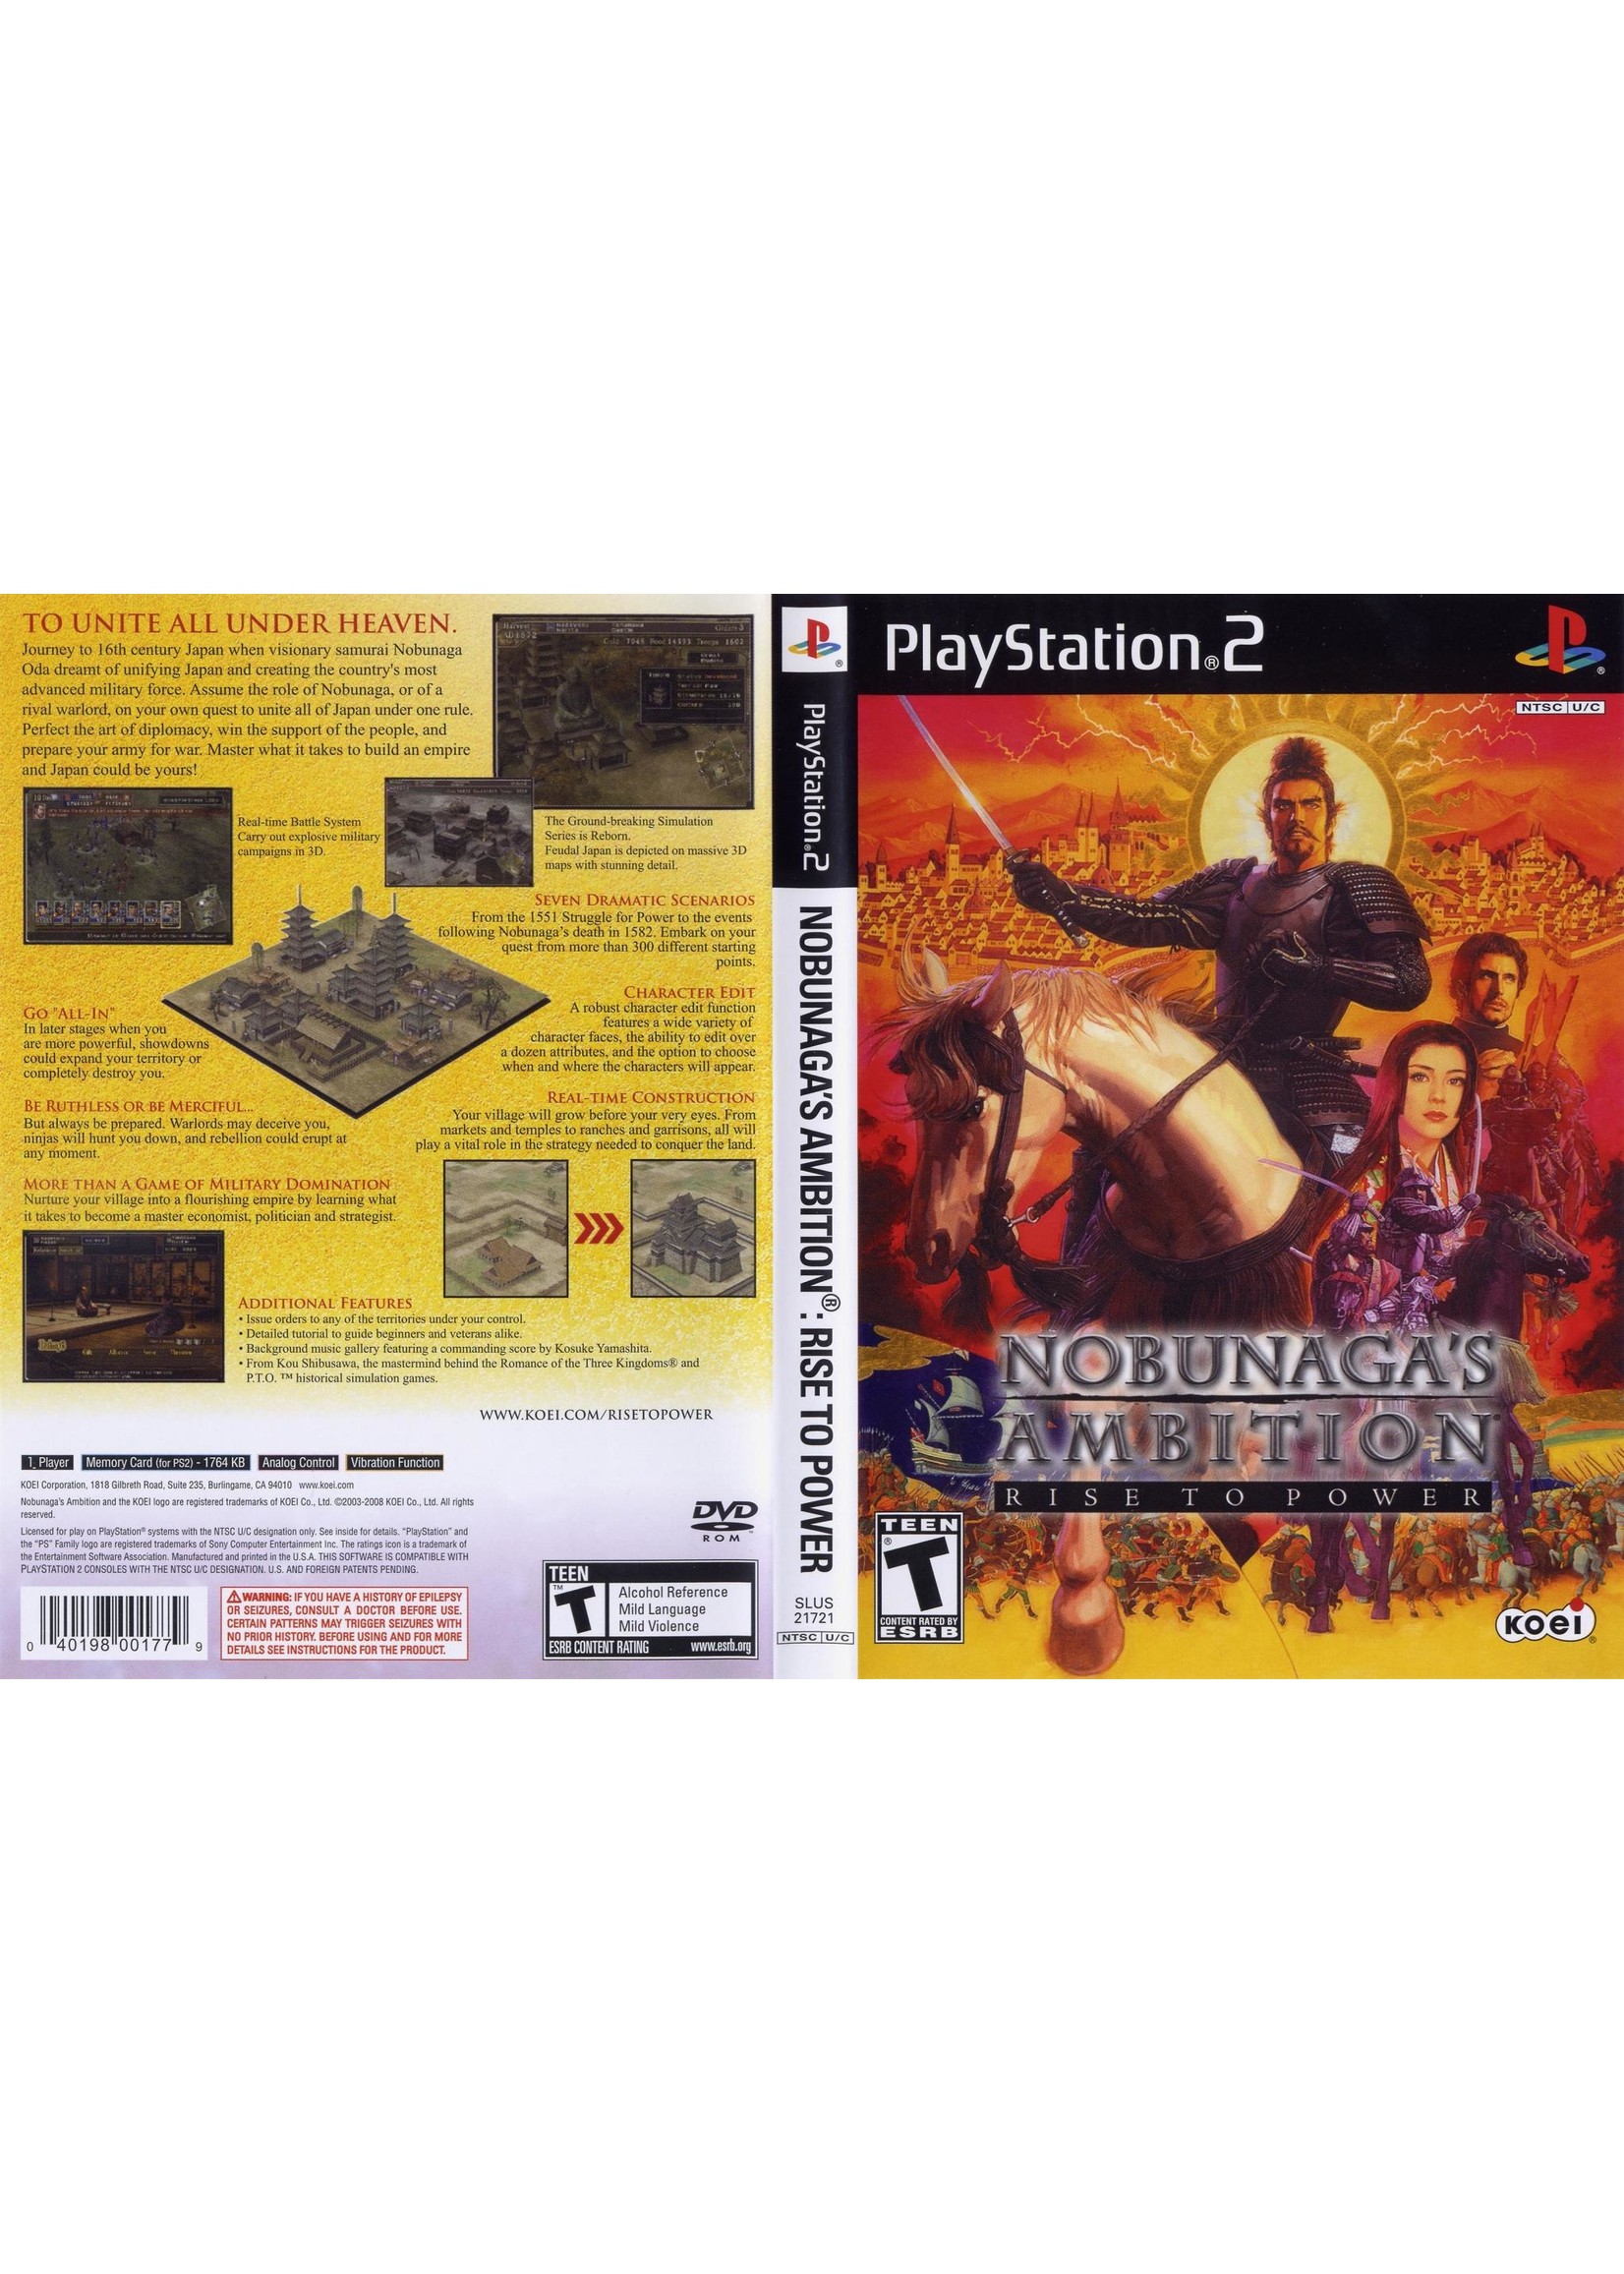 Sony Playstation 2 (PS2) Nobunaga's Ambition Rise to Power